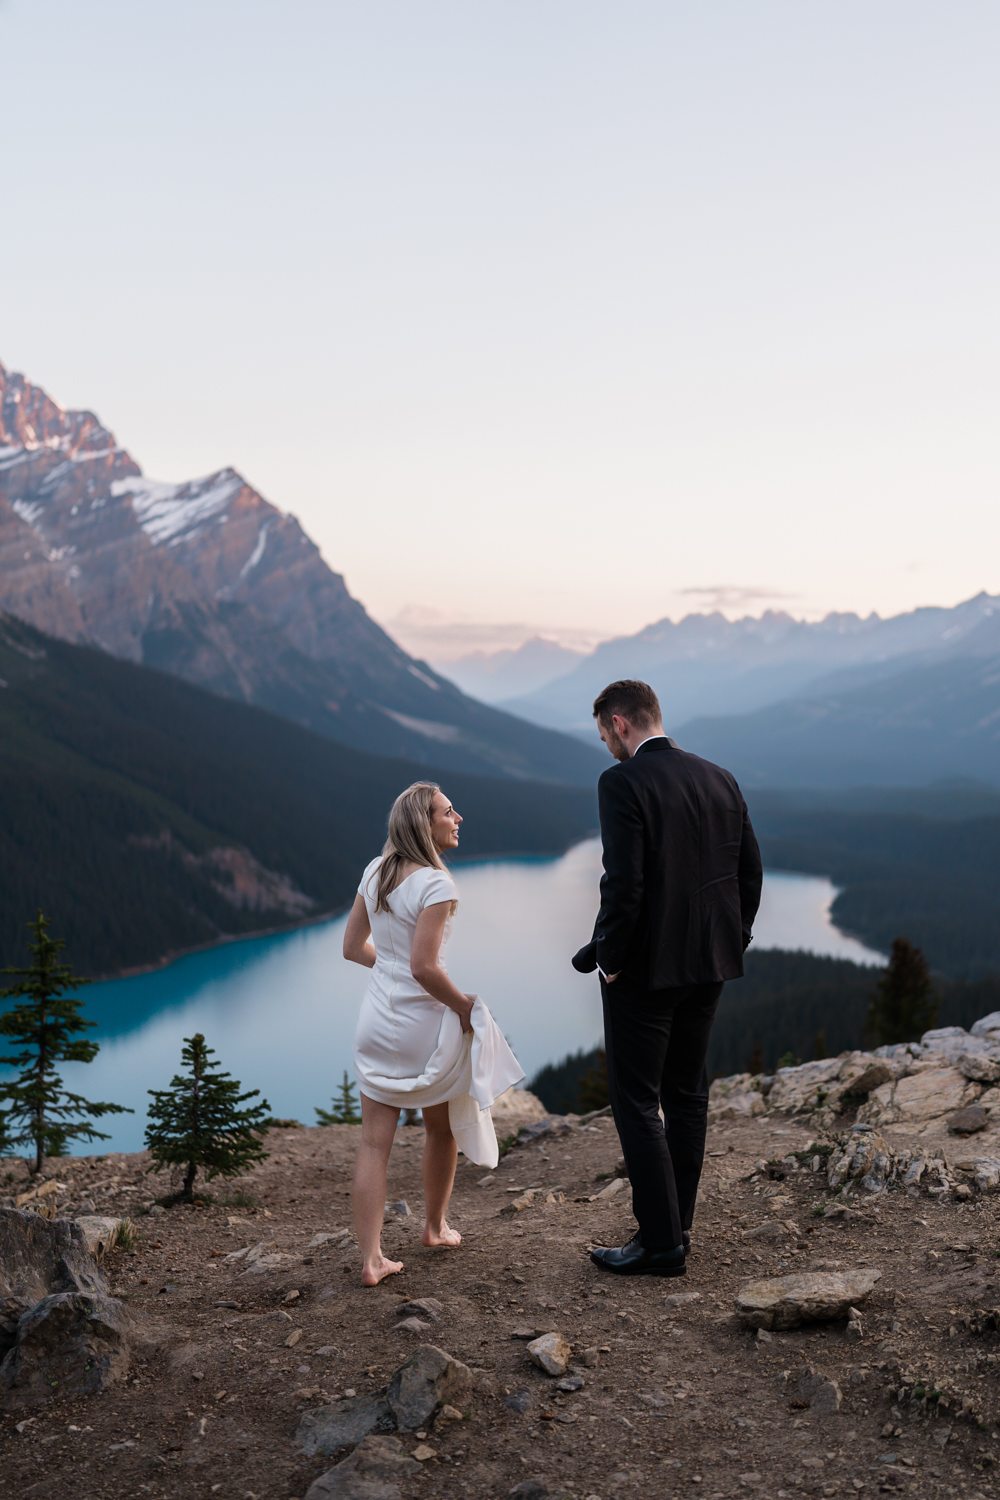 A barefoot bride walks beside the groom and they talk during their sunrise elopement in Banff National Park